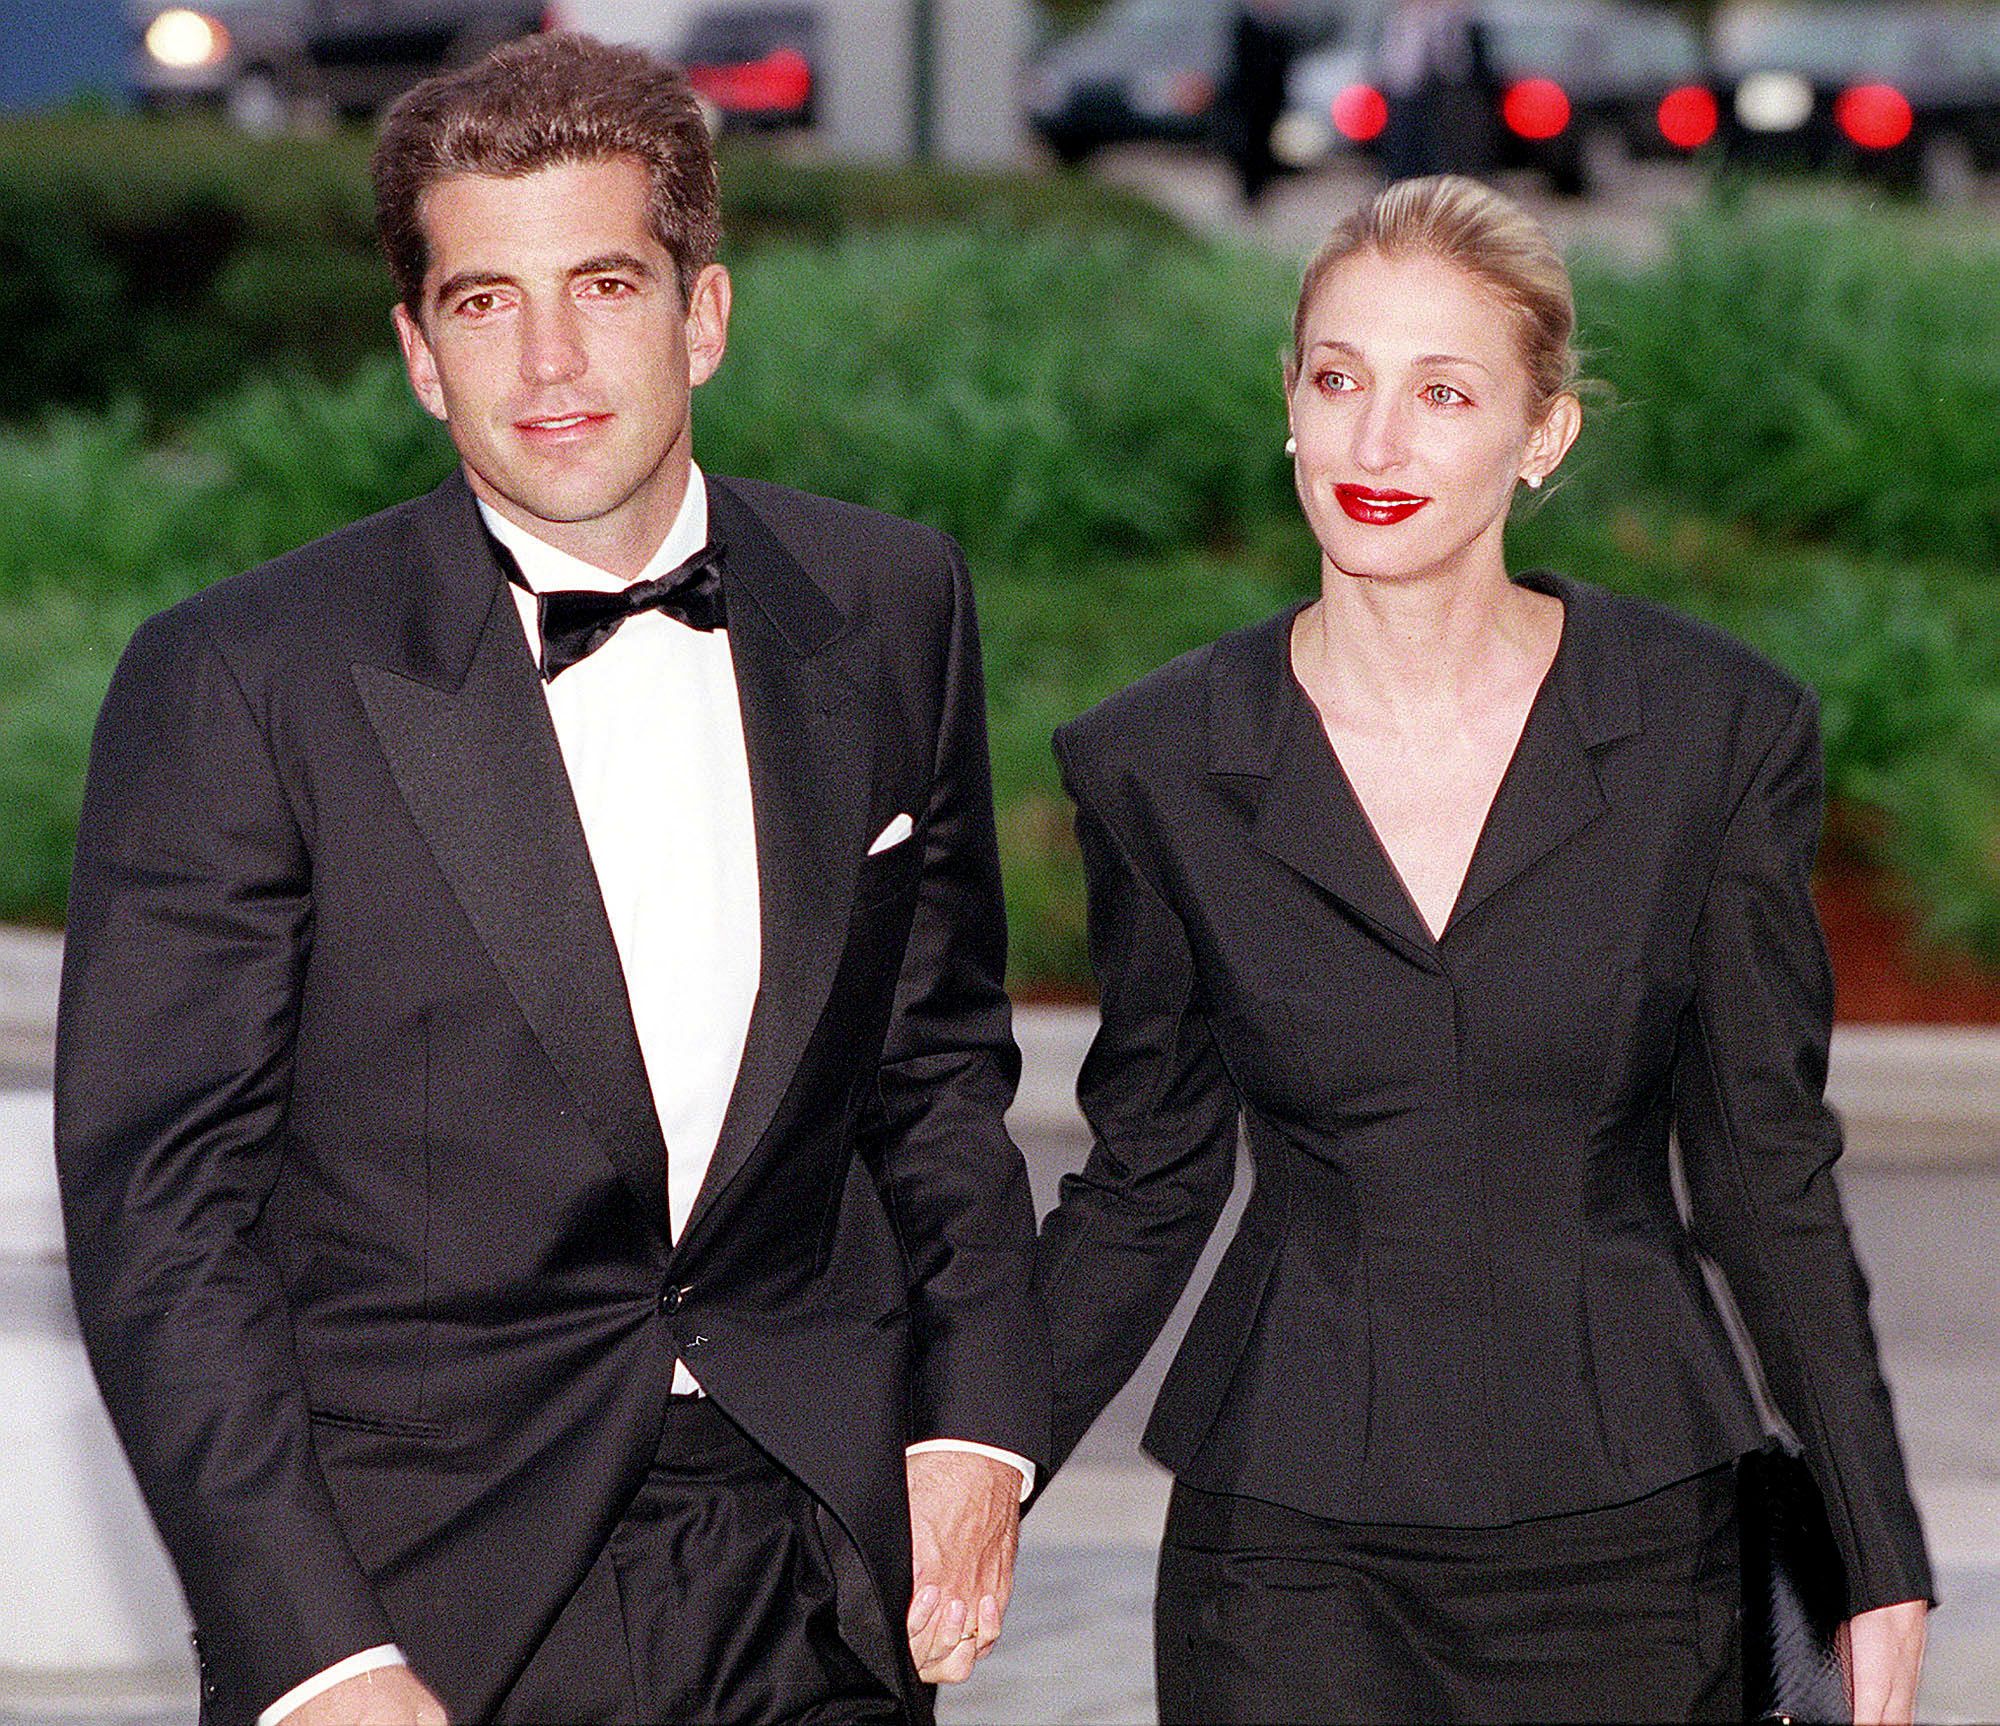 John F. Kennedy, Jr. and his wife Carolyn Bessette Kennedy at the annual John F. Kennedy Library Foundation dinner and Profiles in Courage awards in honor of the former President's 82nd Birthday, Sunday, May 23, 1999 | Photo: Getty Images